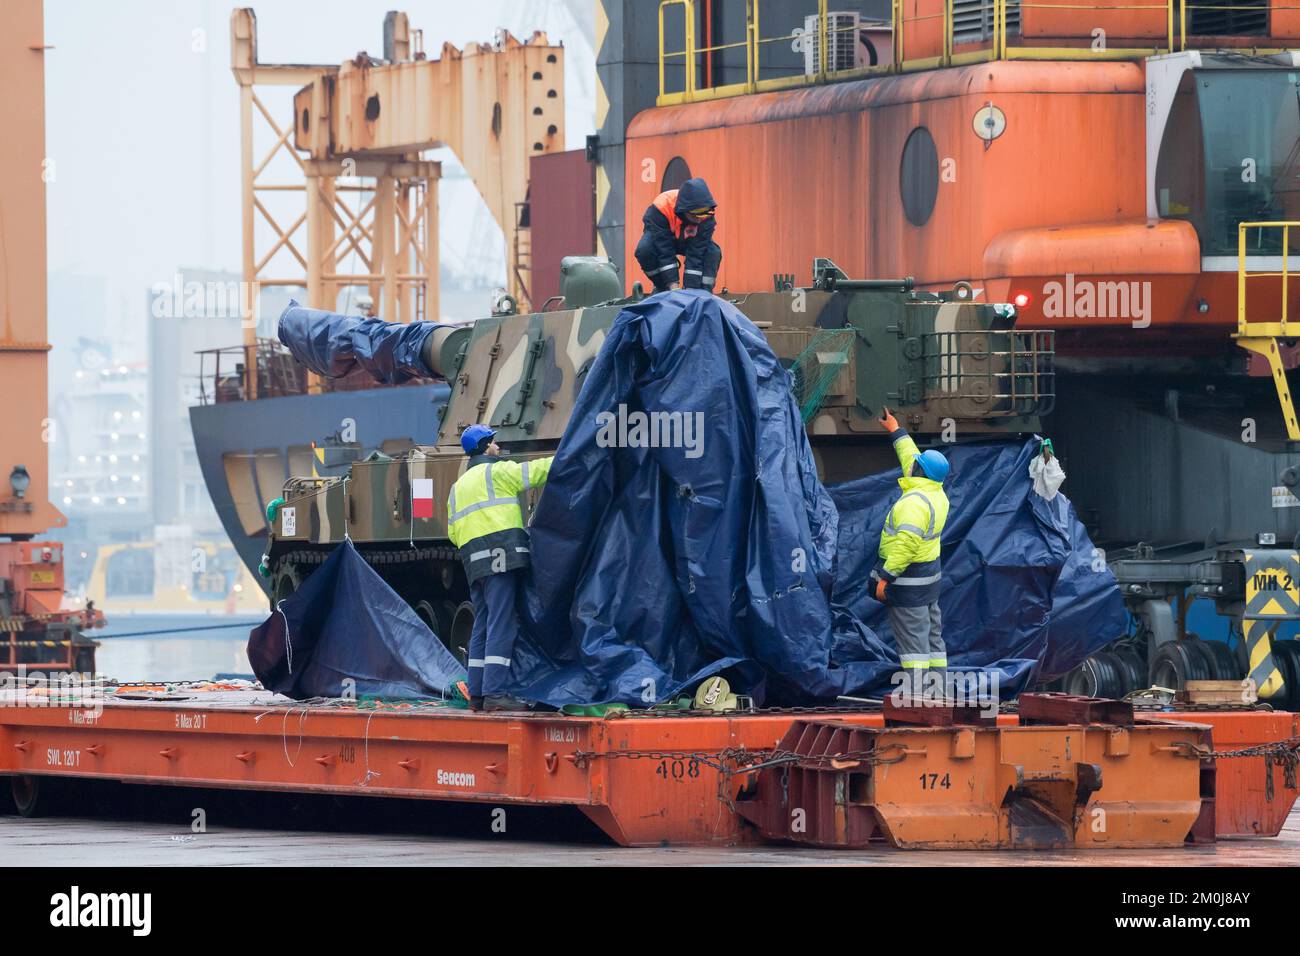 Gdynia, Poland. 6th December 2022. Arrival of the first South Korea`s K9 Thunder gun-howitzers for the Polish Armed Forces © Wojciech Strozyk / Alamy Live News Stock Photo